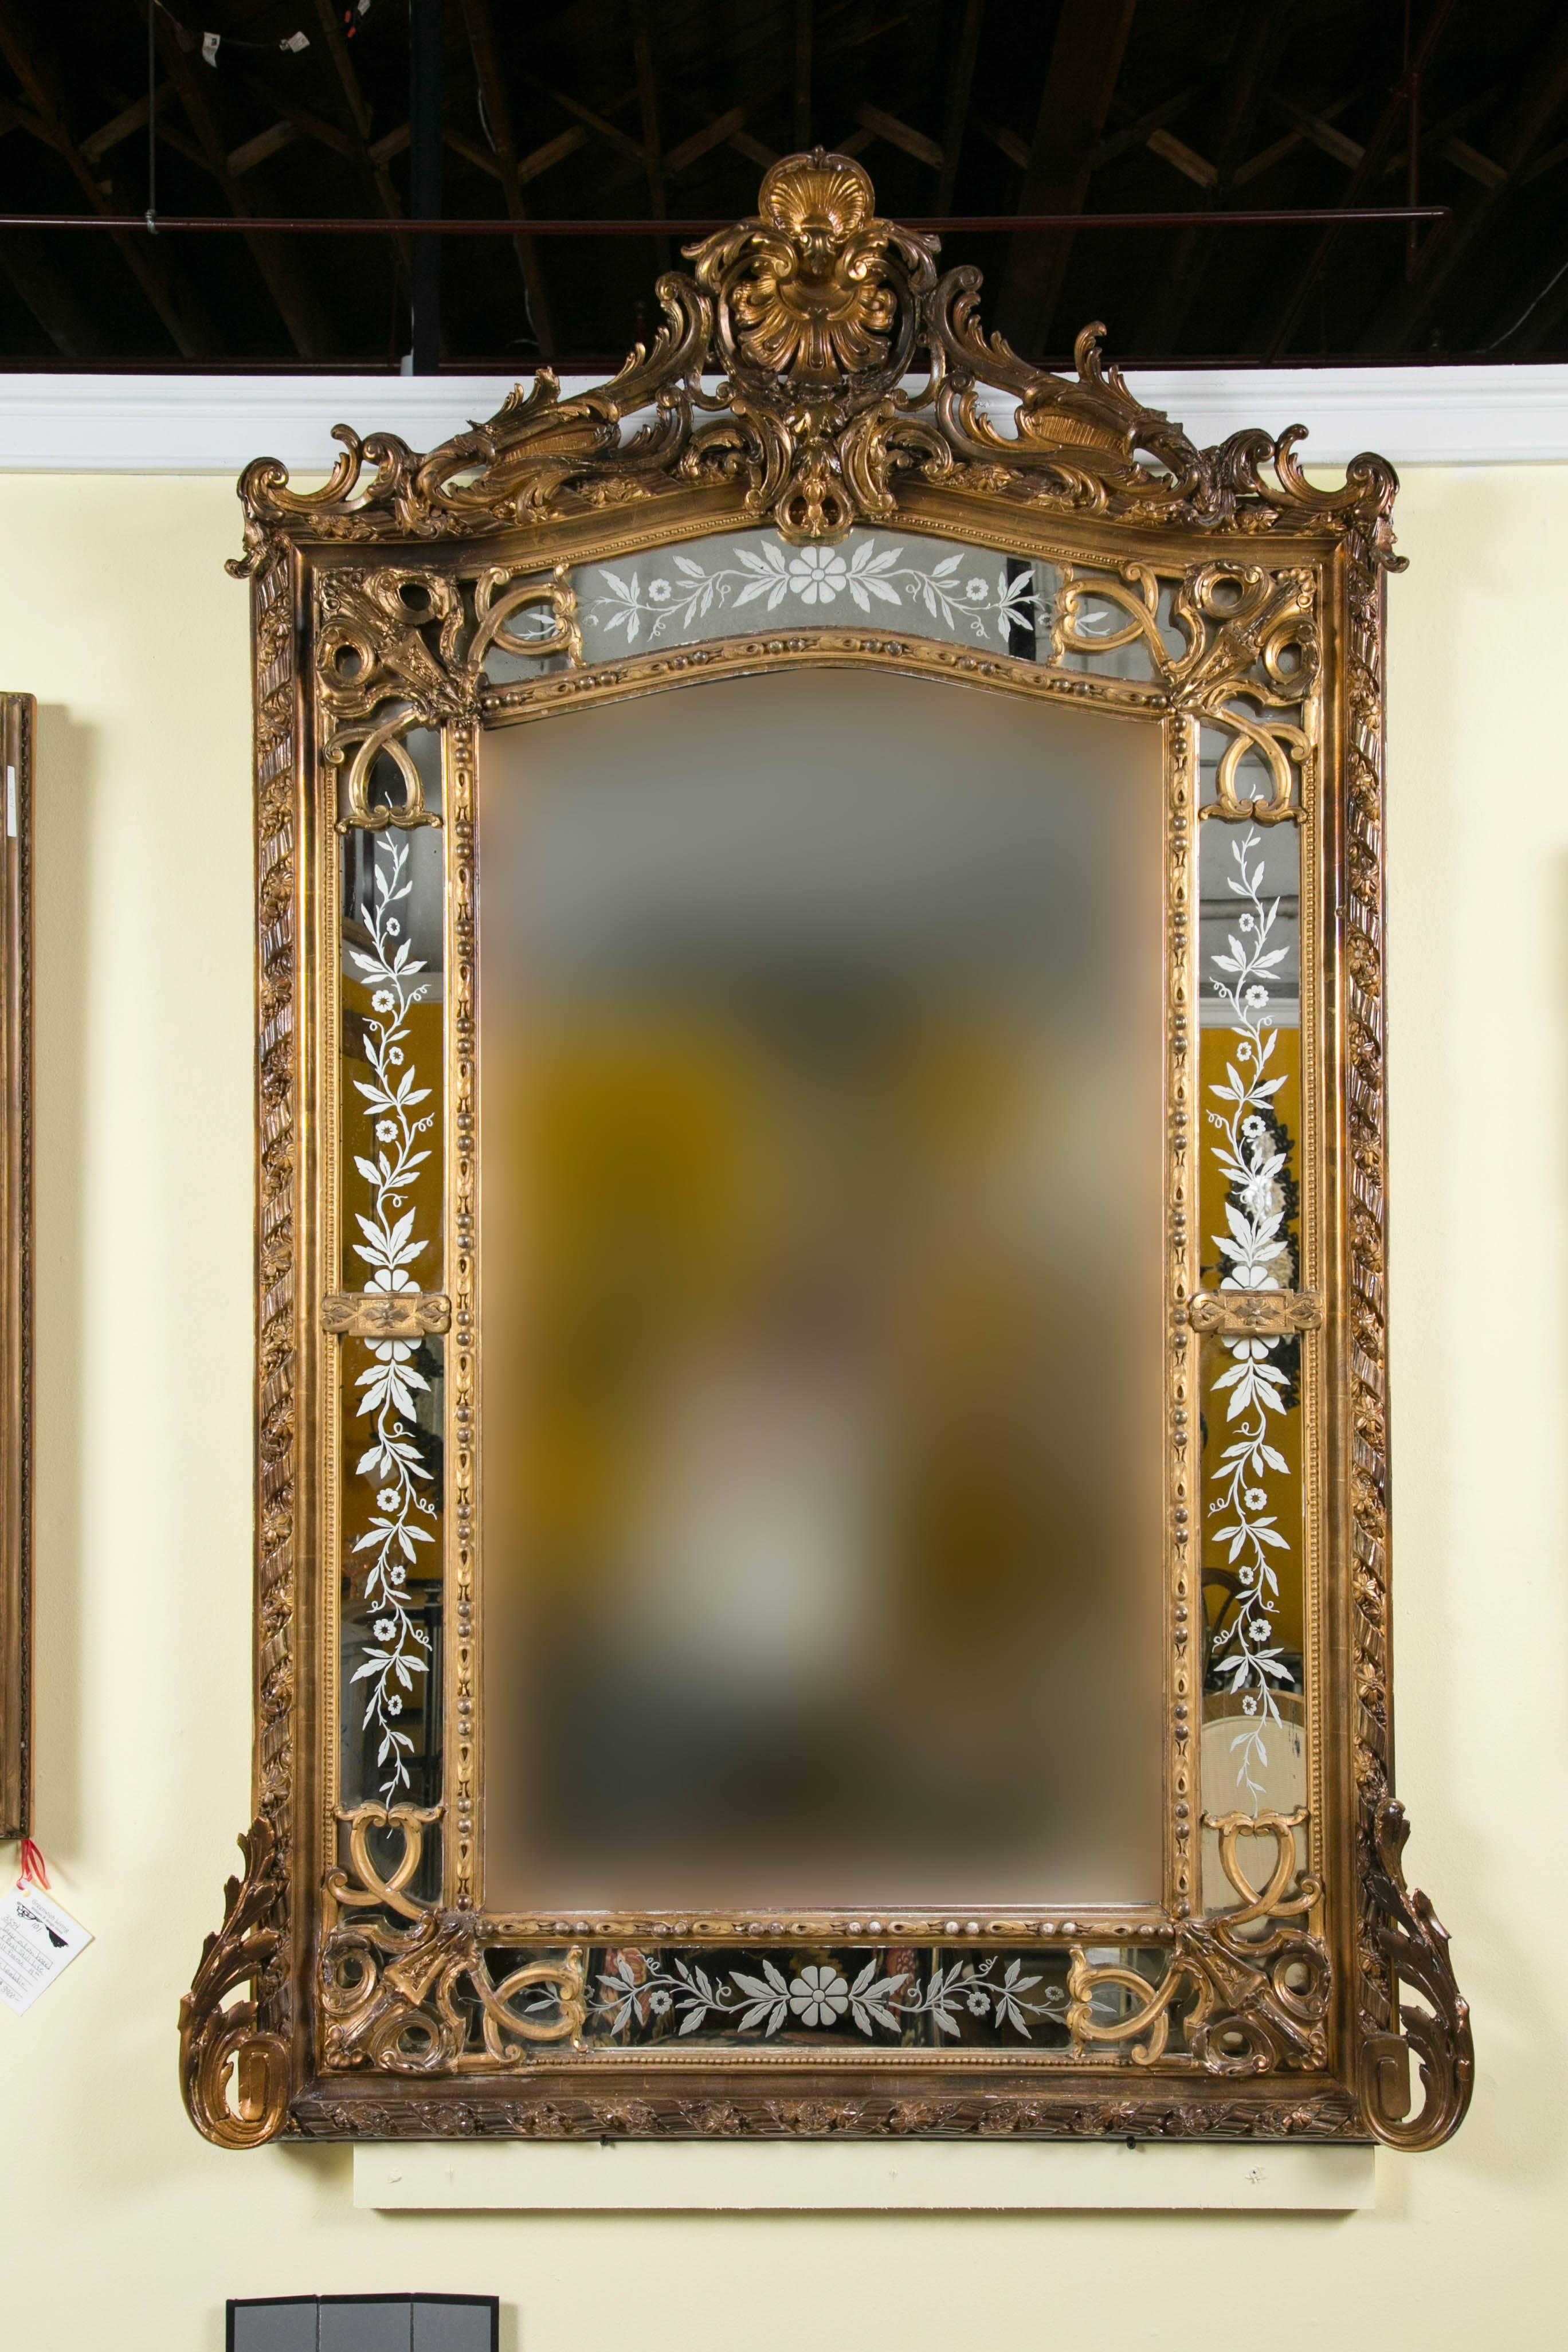 A 19th century French gilded wood and gesso monumental wall / over the mantel mirror. If a statement is needed this is certainly the mirror to make it with. The beveled center framed flanked by four panels of etched glass floral design mirrors. The